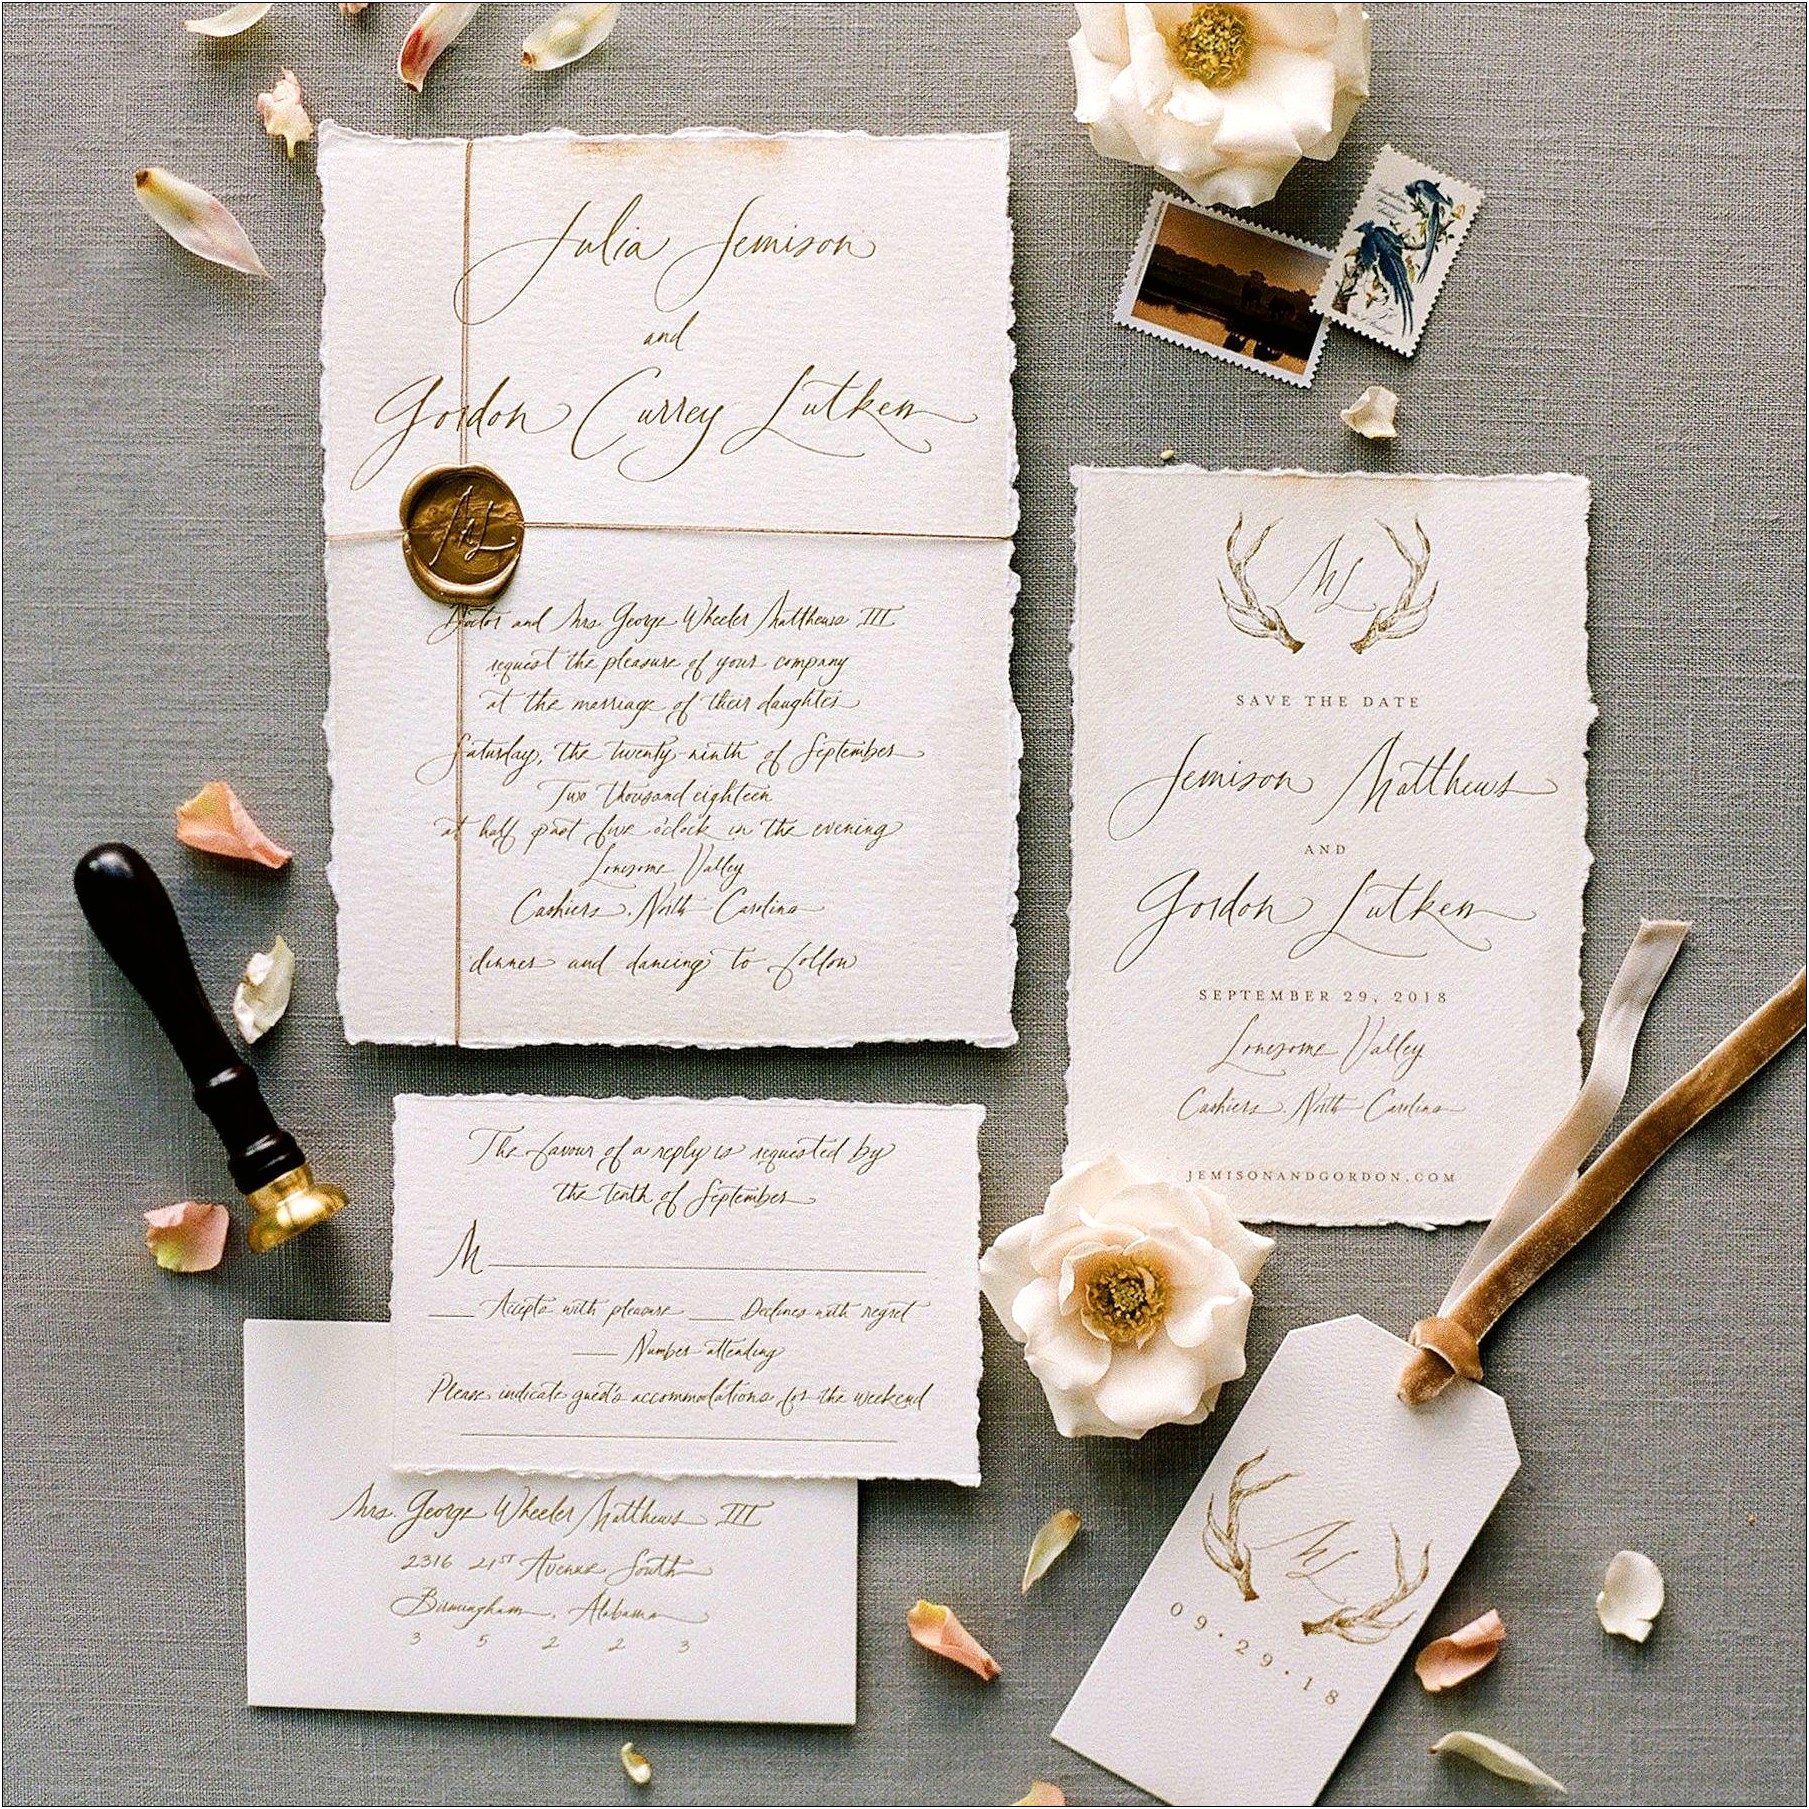 Famous Love Quotes For Wedding Invitations